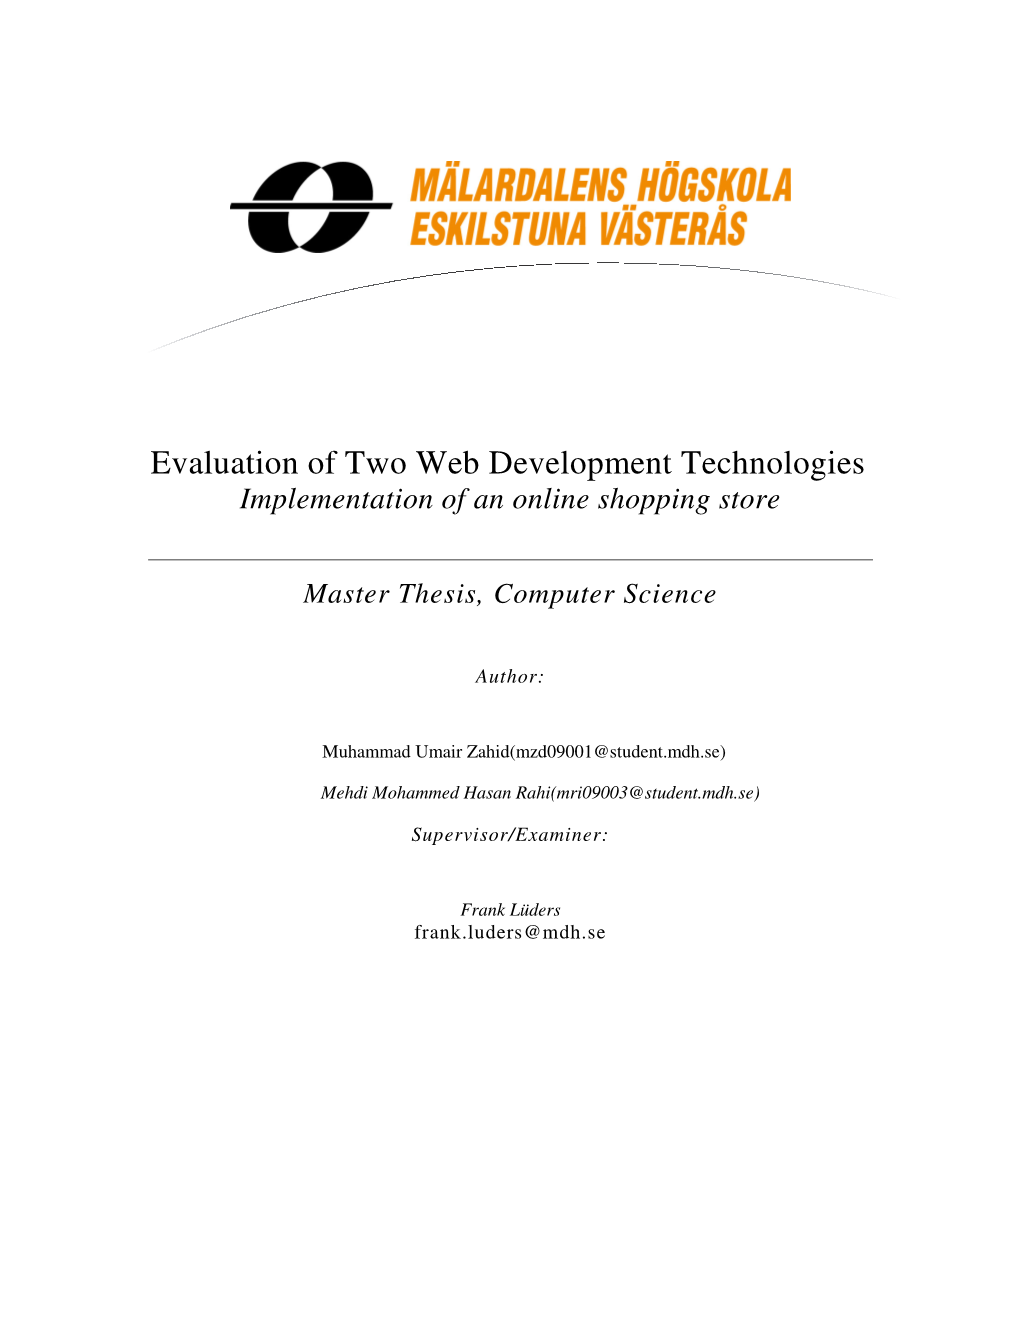 Evaluation of Two Web Development Technologies Implementation of an Online Shopping Store